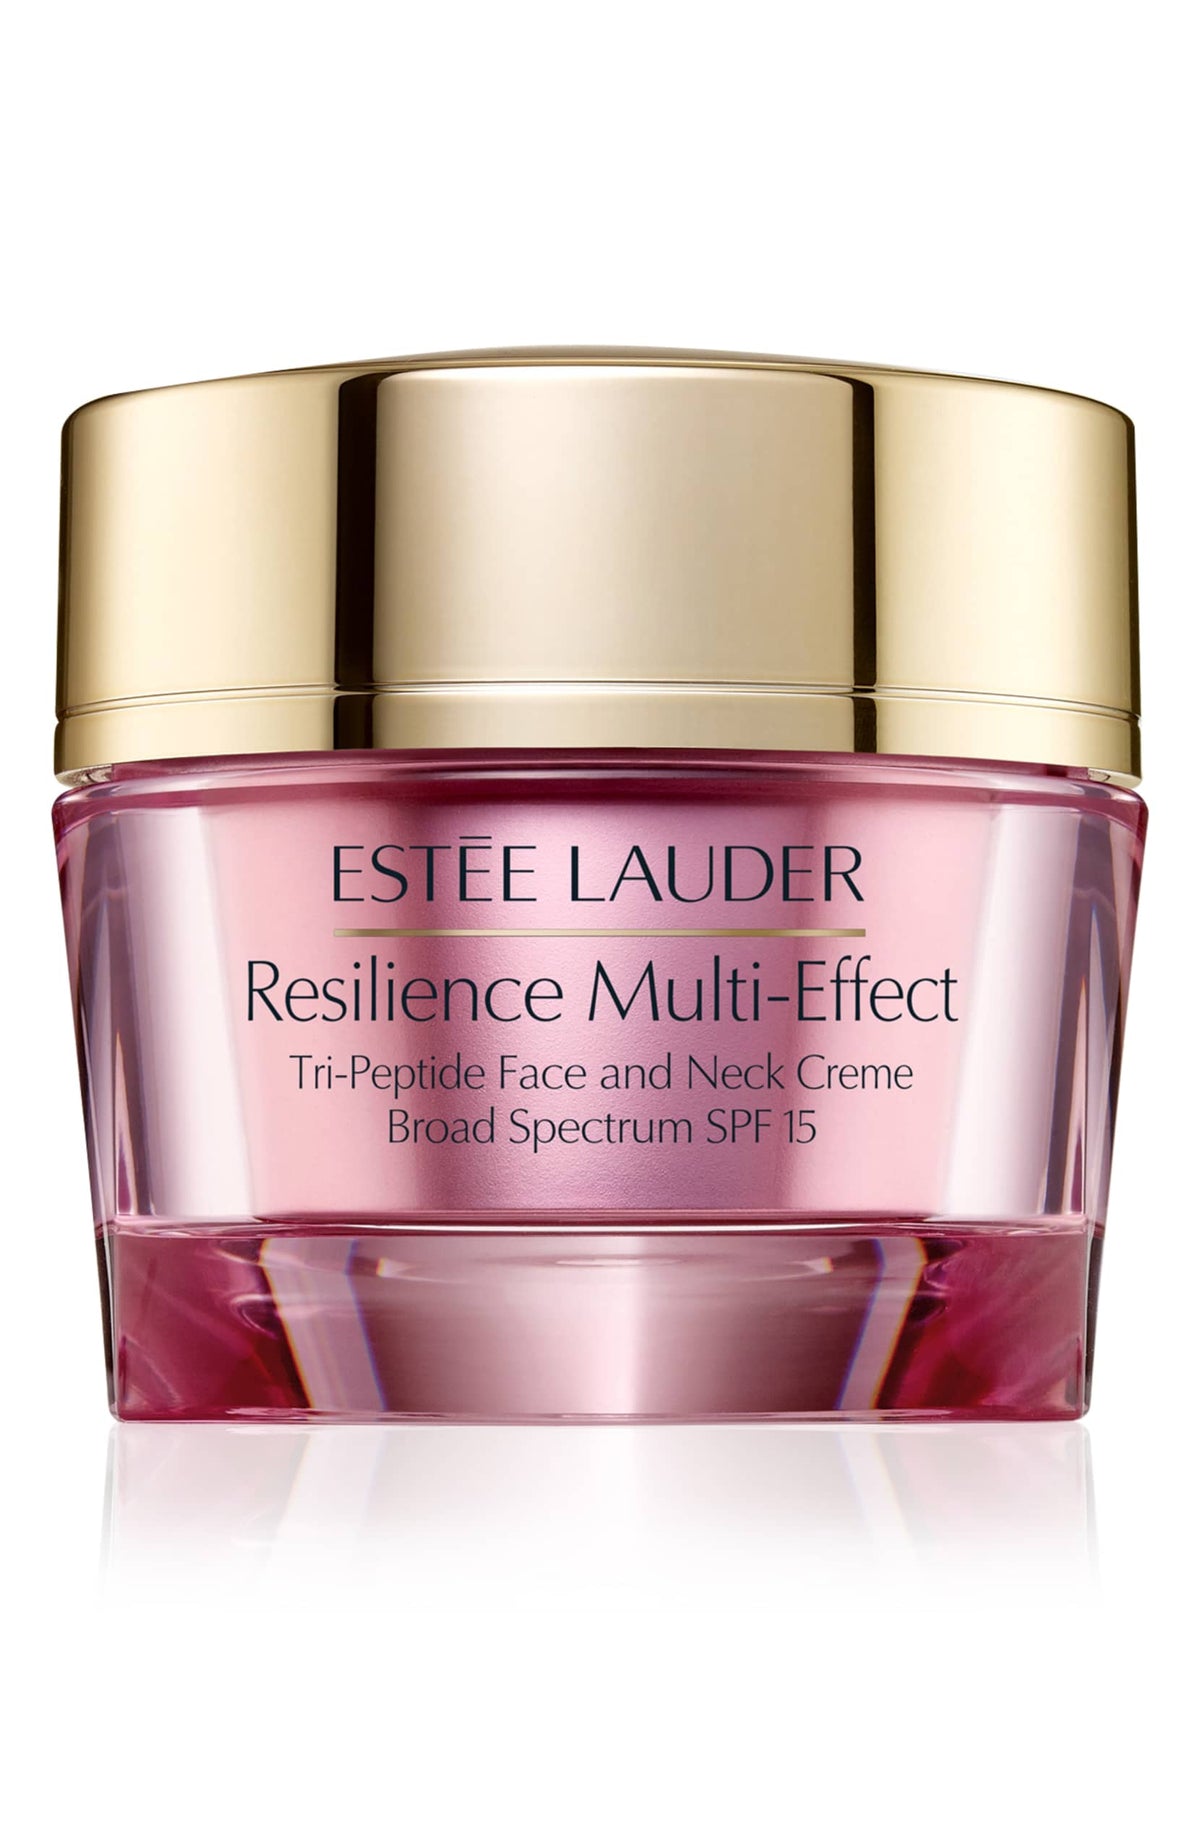 Estee Lauder Resilience Multi-Effect Tri-Peptide Face and Neck Creme SPF 15 (for Normal/Combination), 2.5 oz - eCosmeticWorld